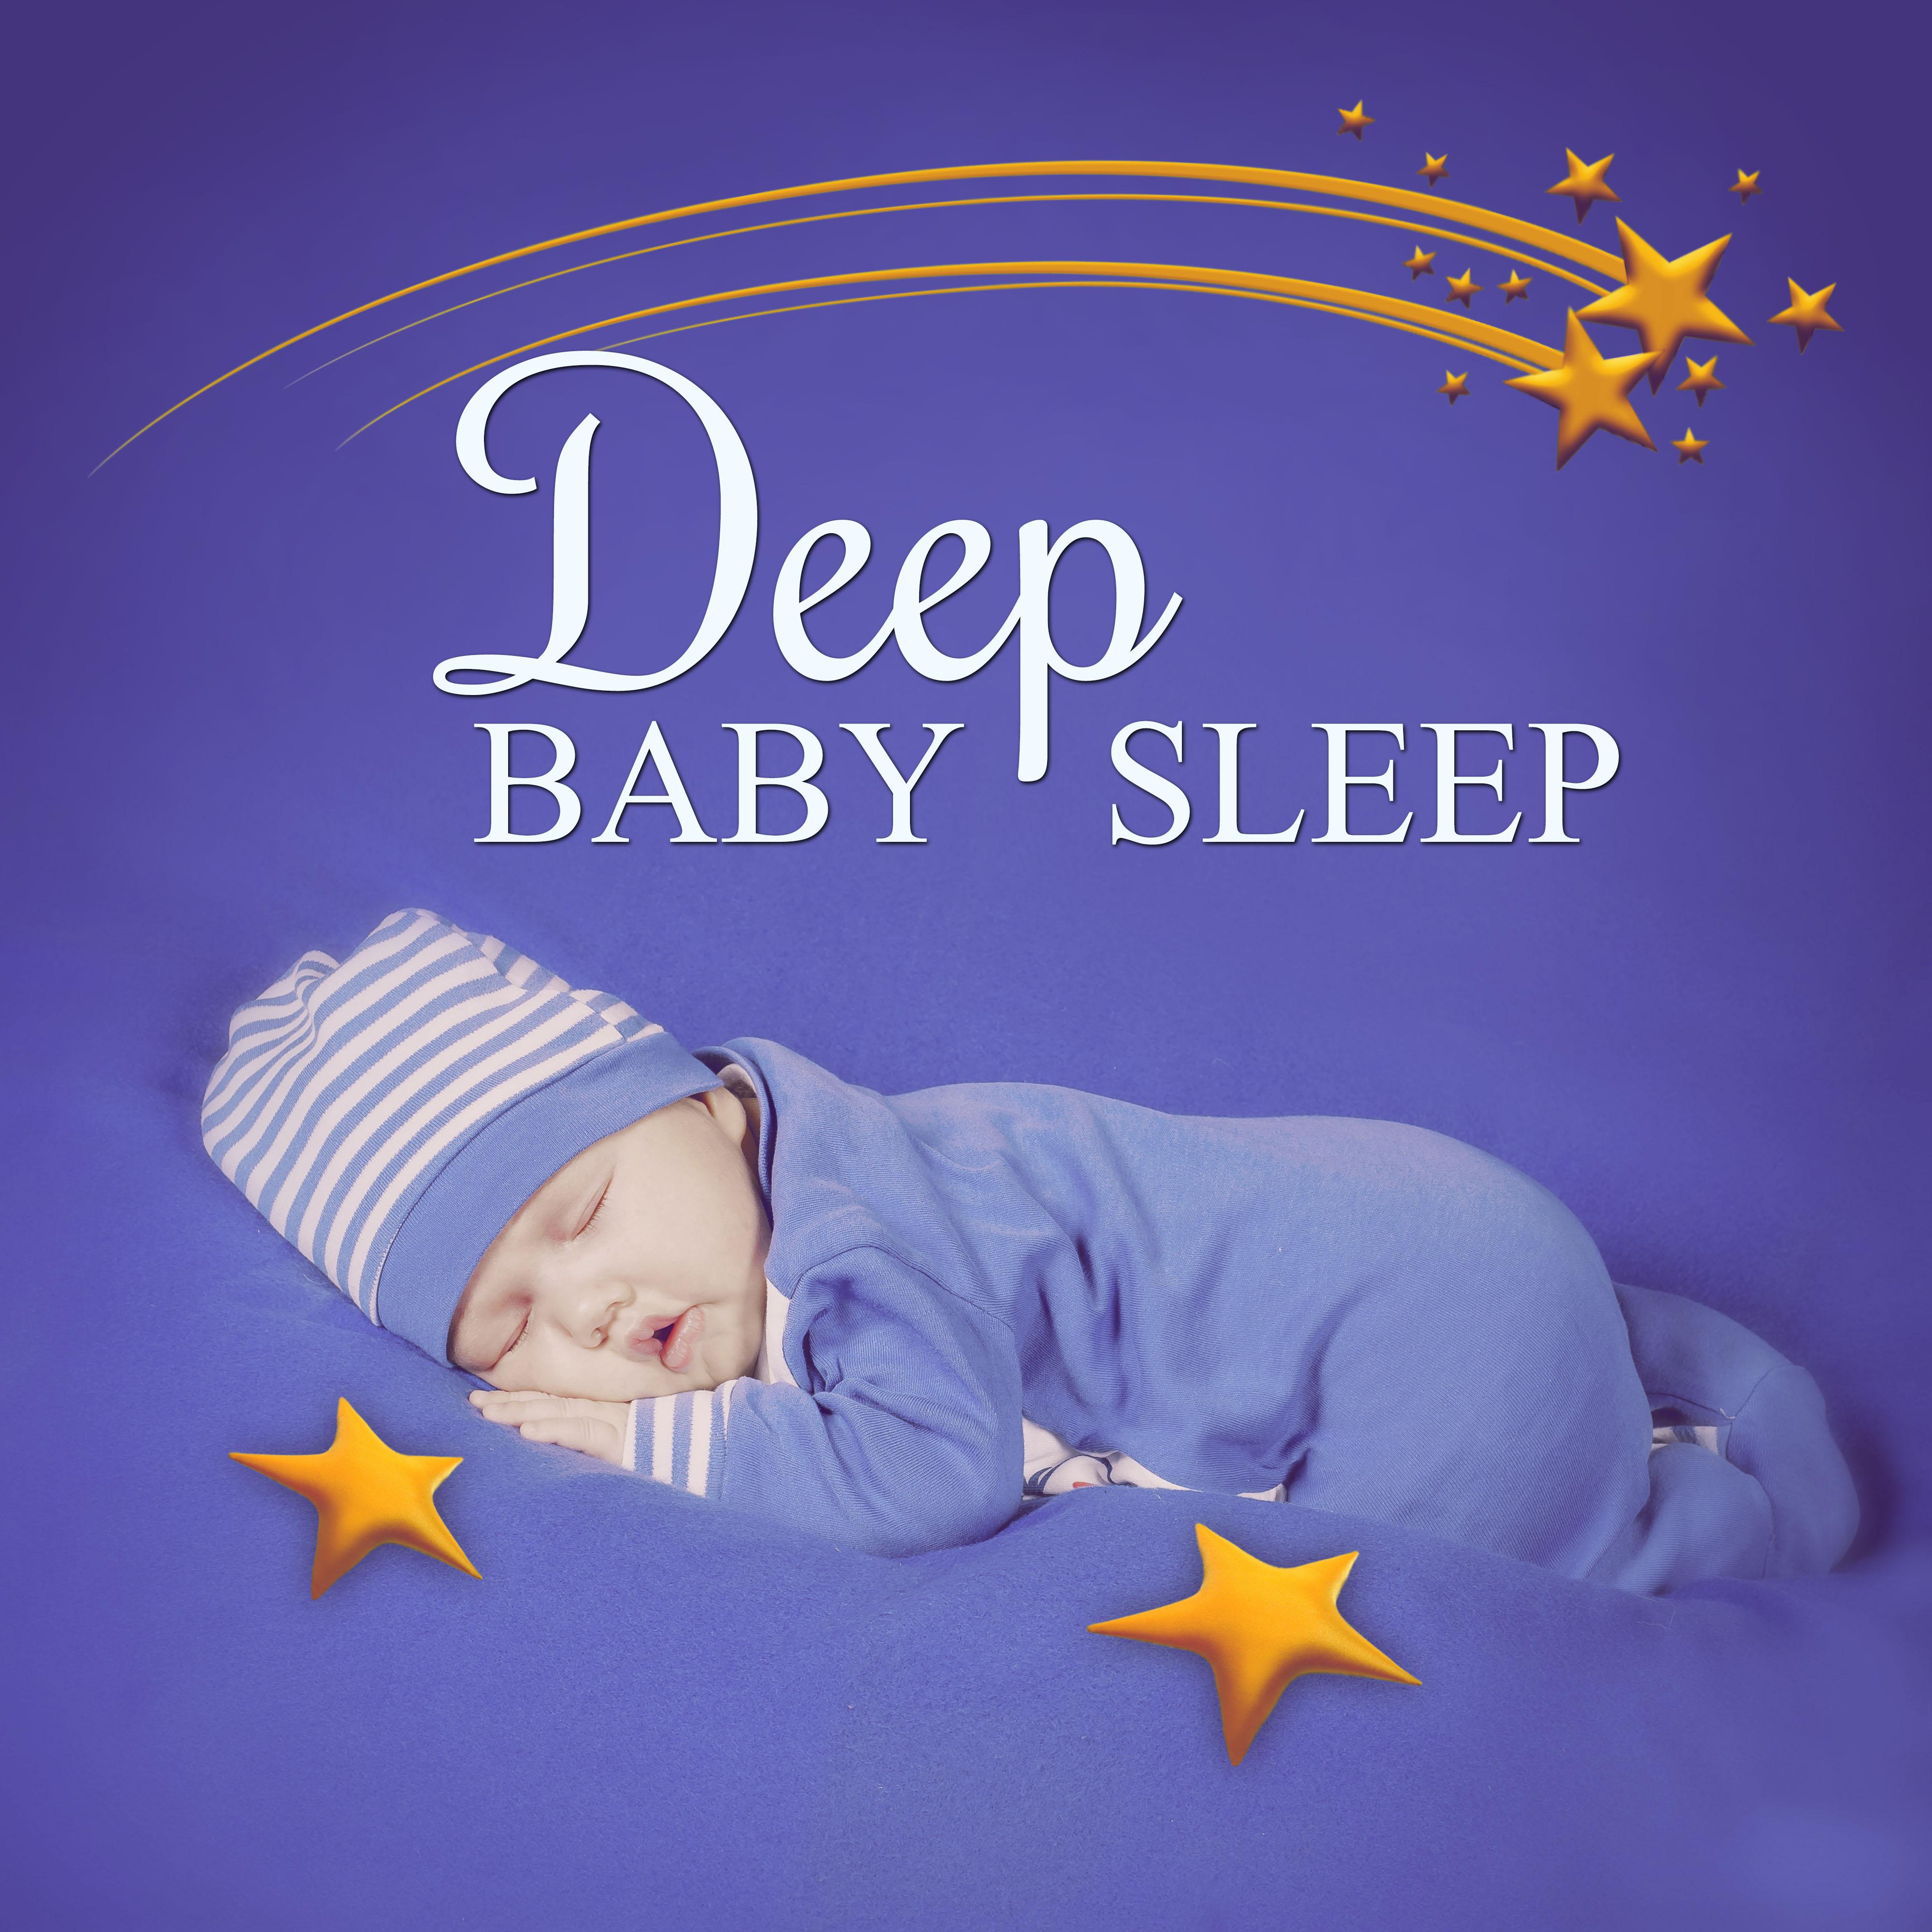 Deep Baby Sleep  Pure Relaxation, Sounds of Nature, Music to Help Your Baby Sleep